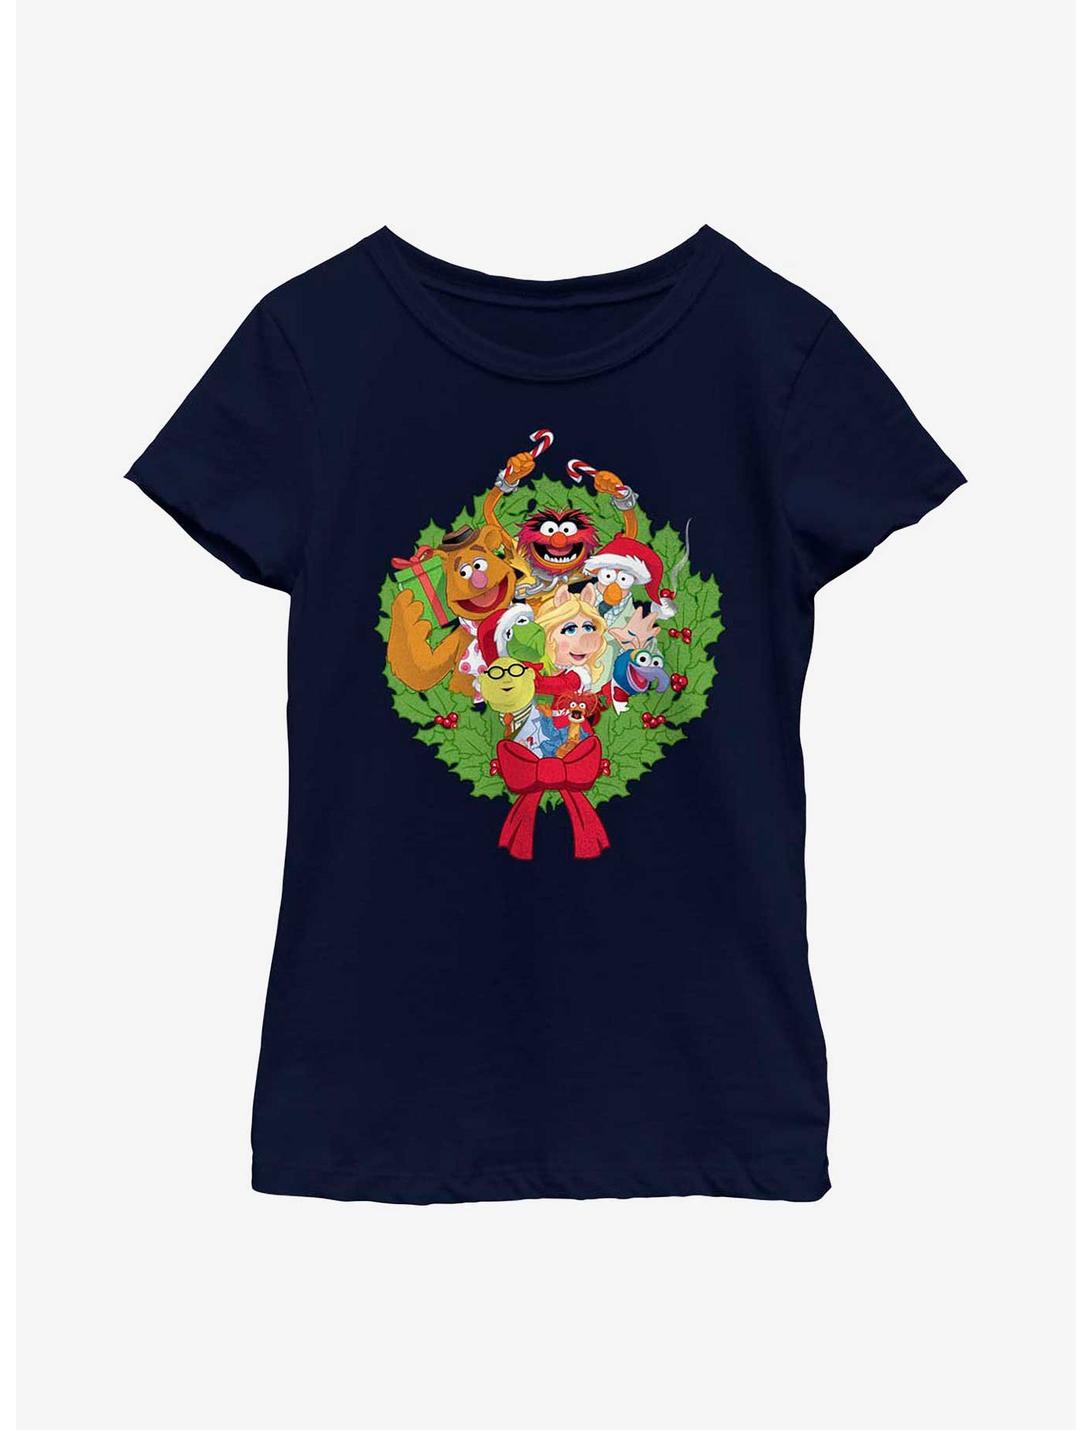 Disney The Muppets Group Wreath Youth Girls T-Shirt, ATH HTR, hi-res